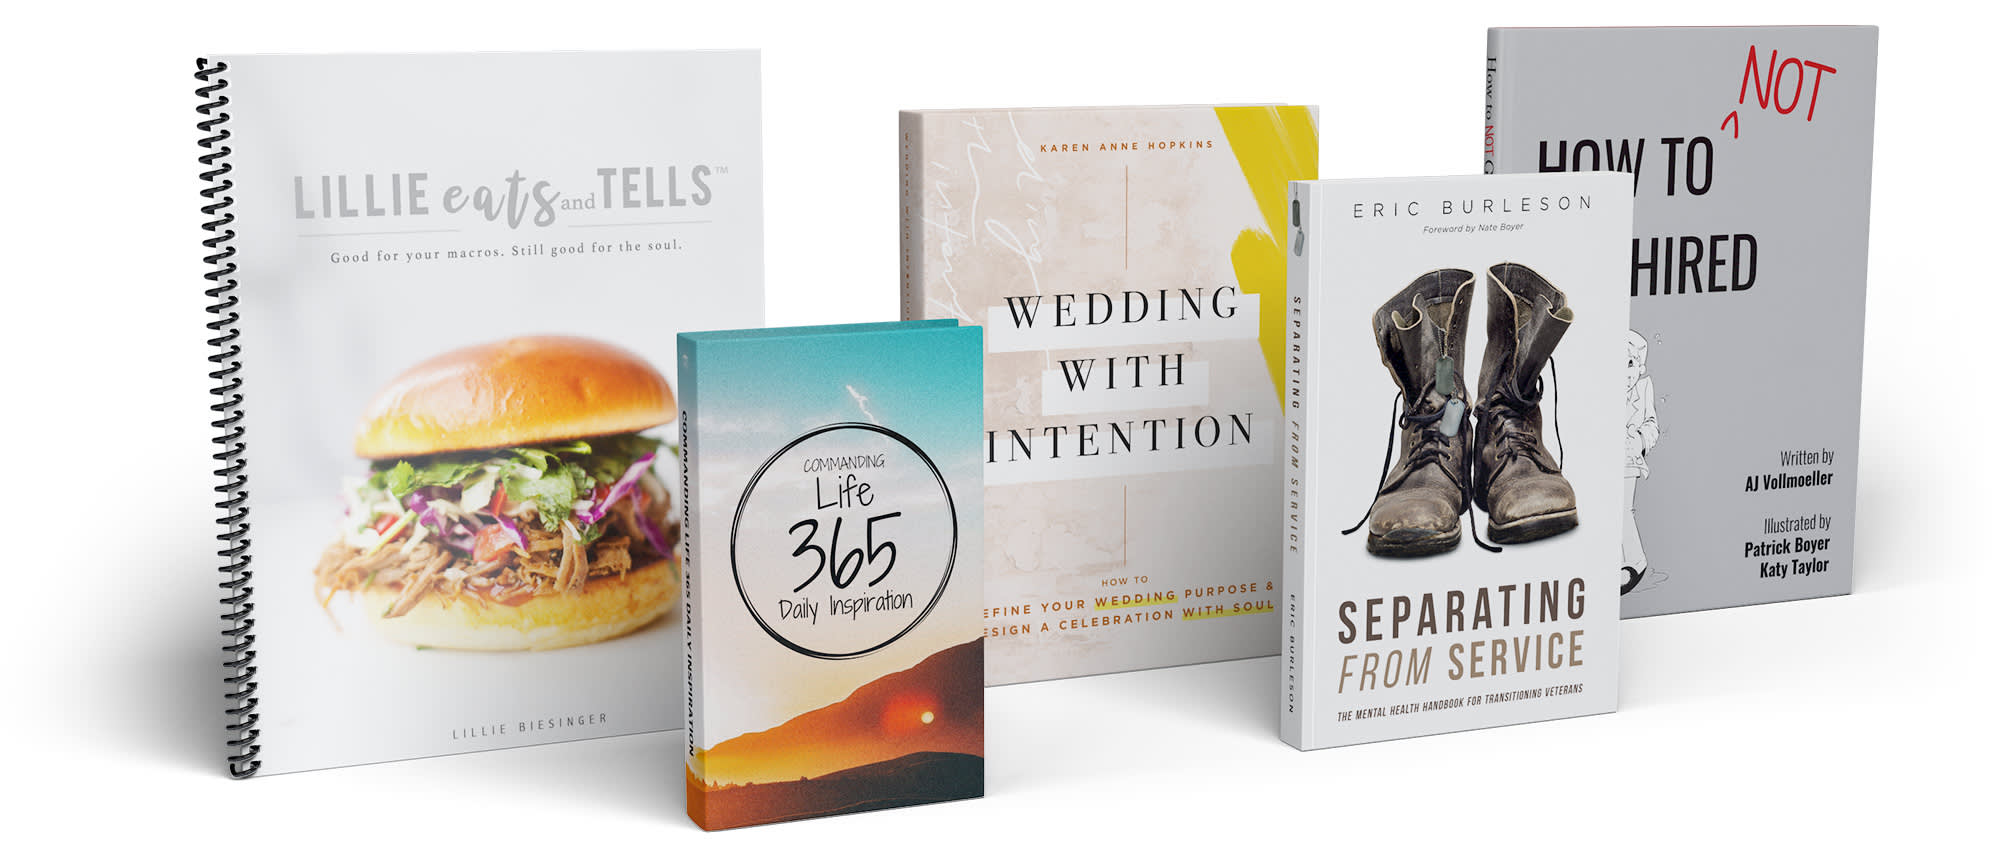 Examples of self published books being sold through Shopify including coil bound cookbooks, paperback non-fiction, custom journals, & more